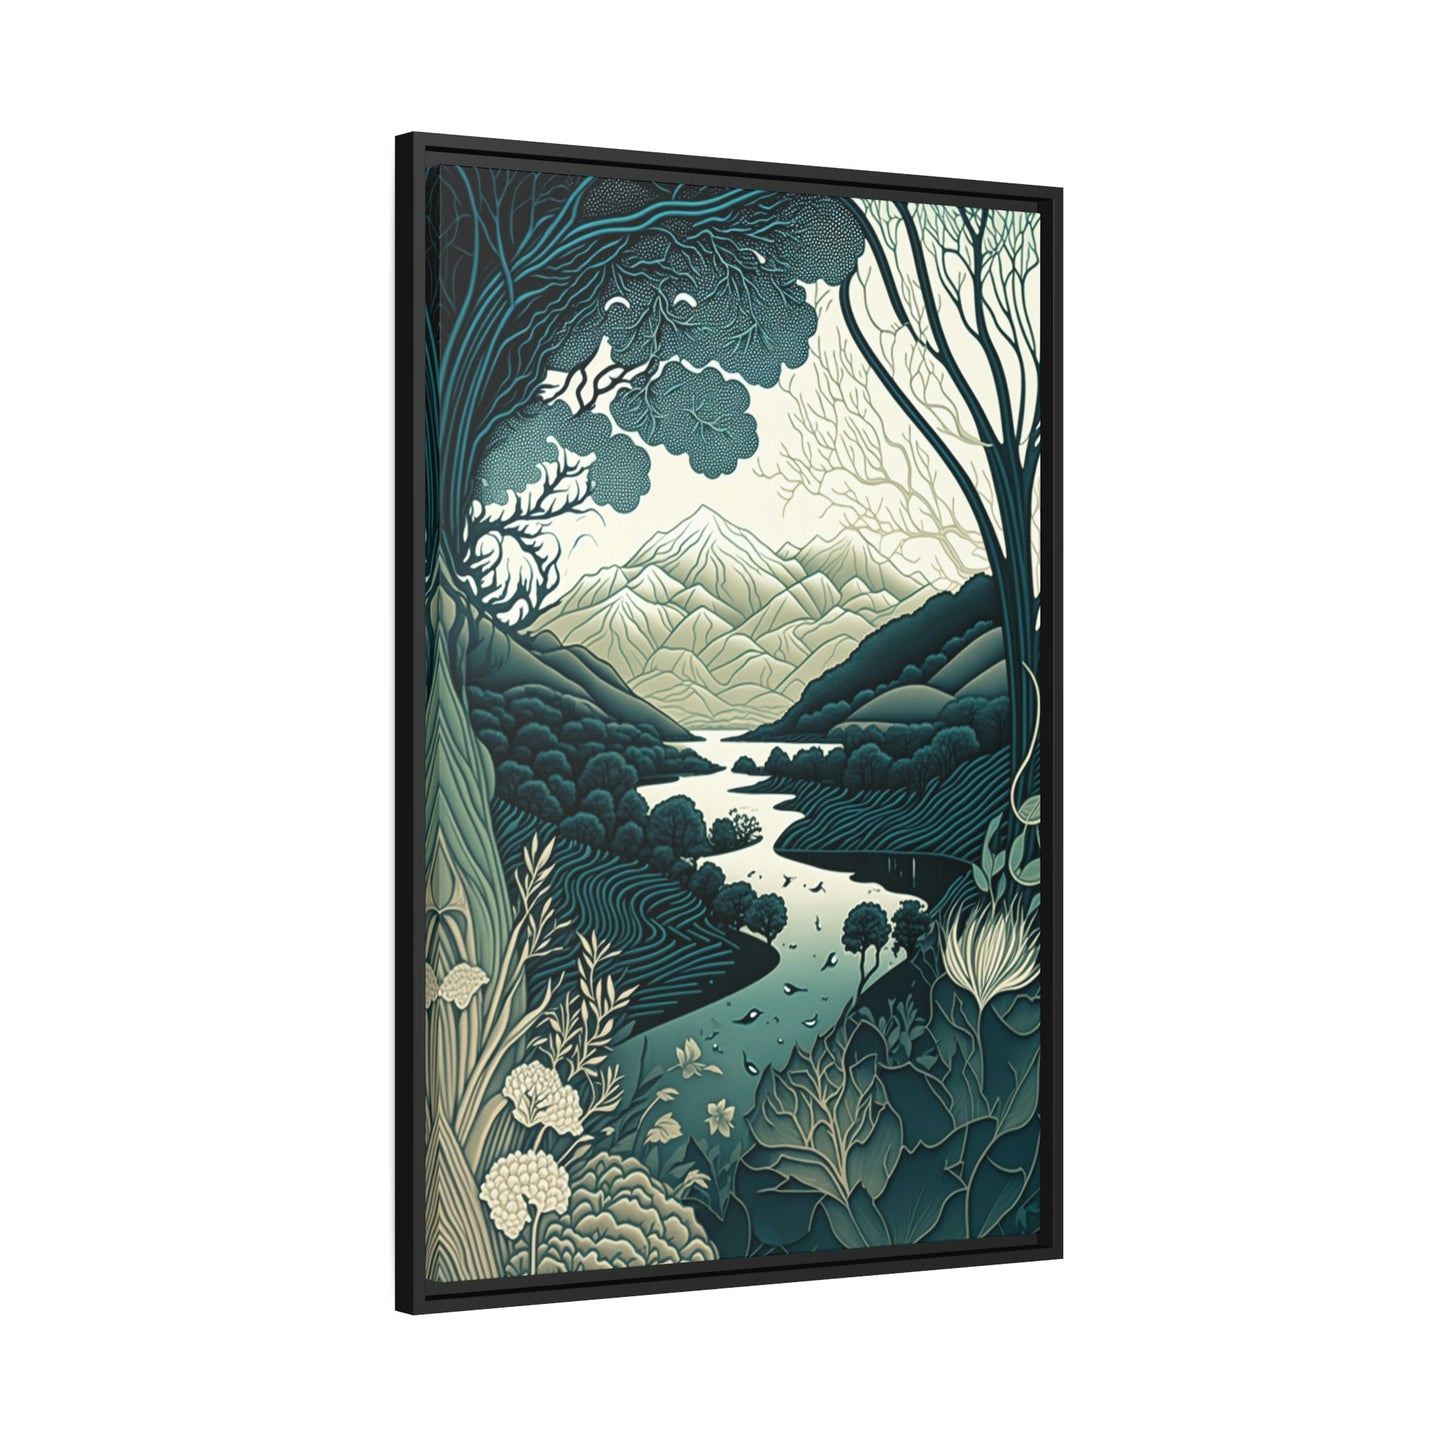 Fluid Lines: A Framed Canvas & Poster Artwork of an Abstract Flowing Design